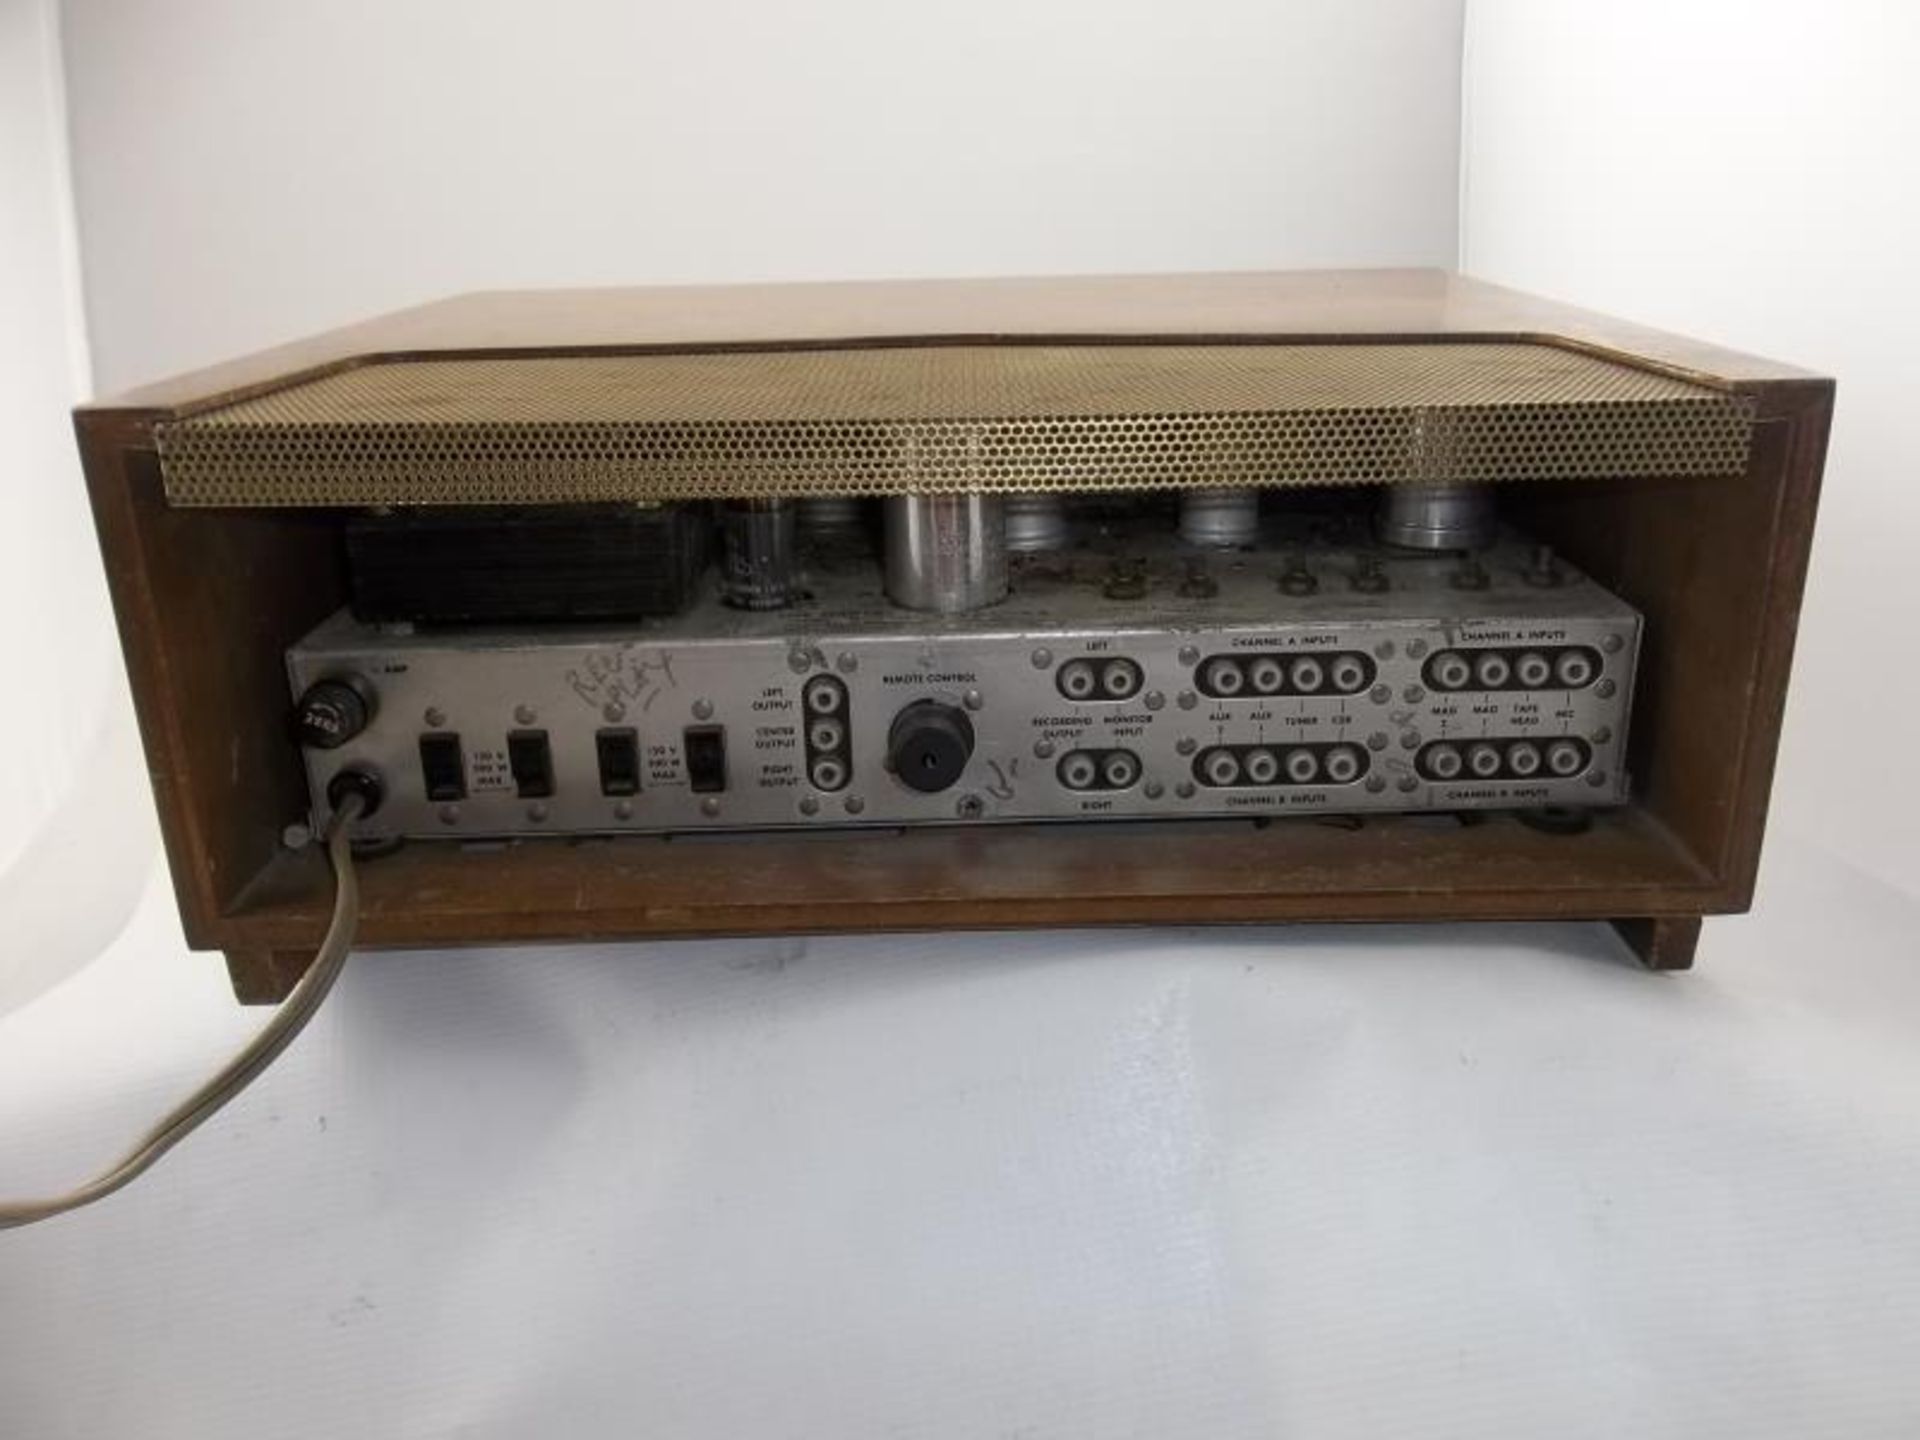 The Fisher stereophonic receiver, audio control model 400-CX, s#0908A, tested - powers up - Image 3 of 6